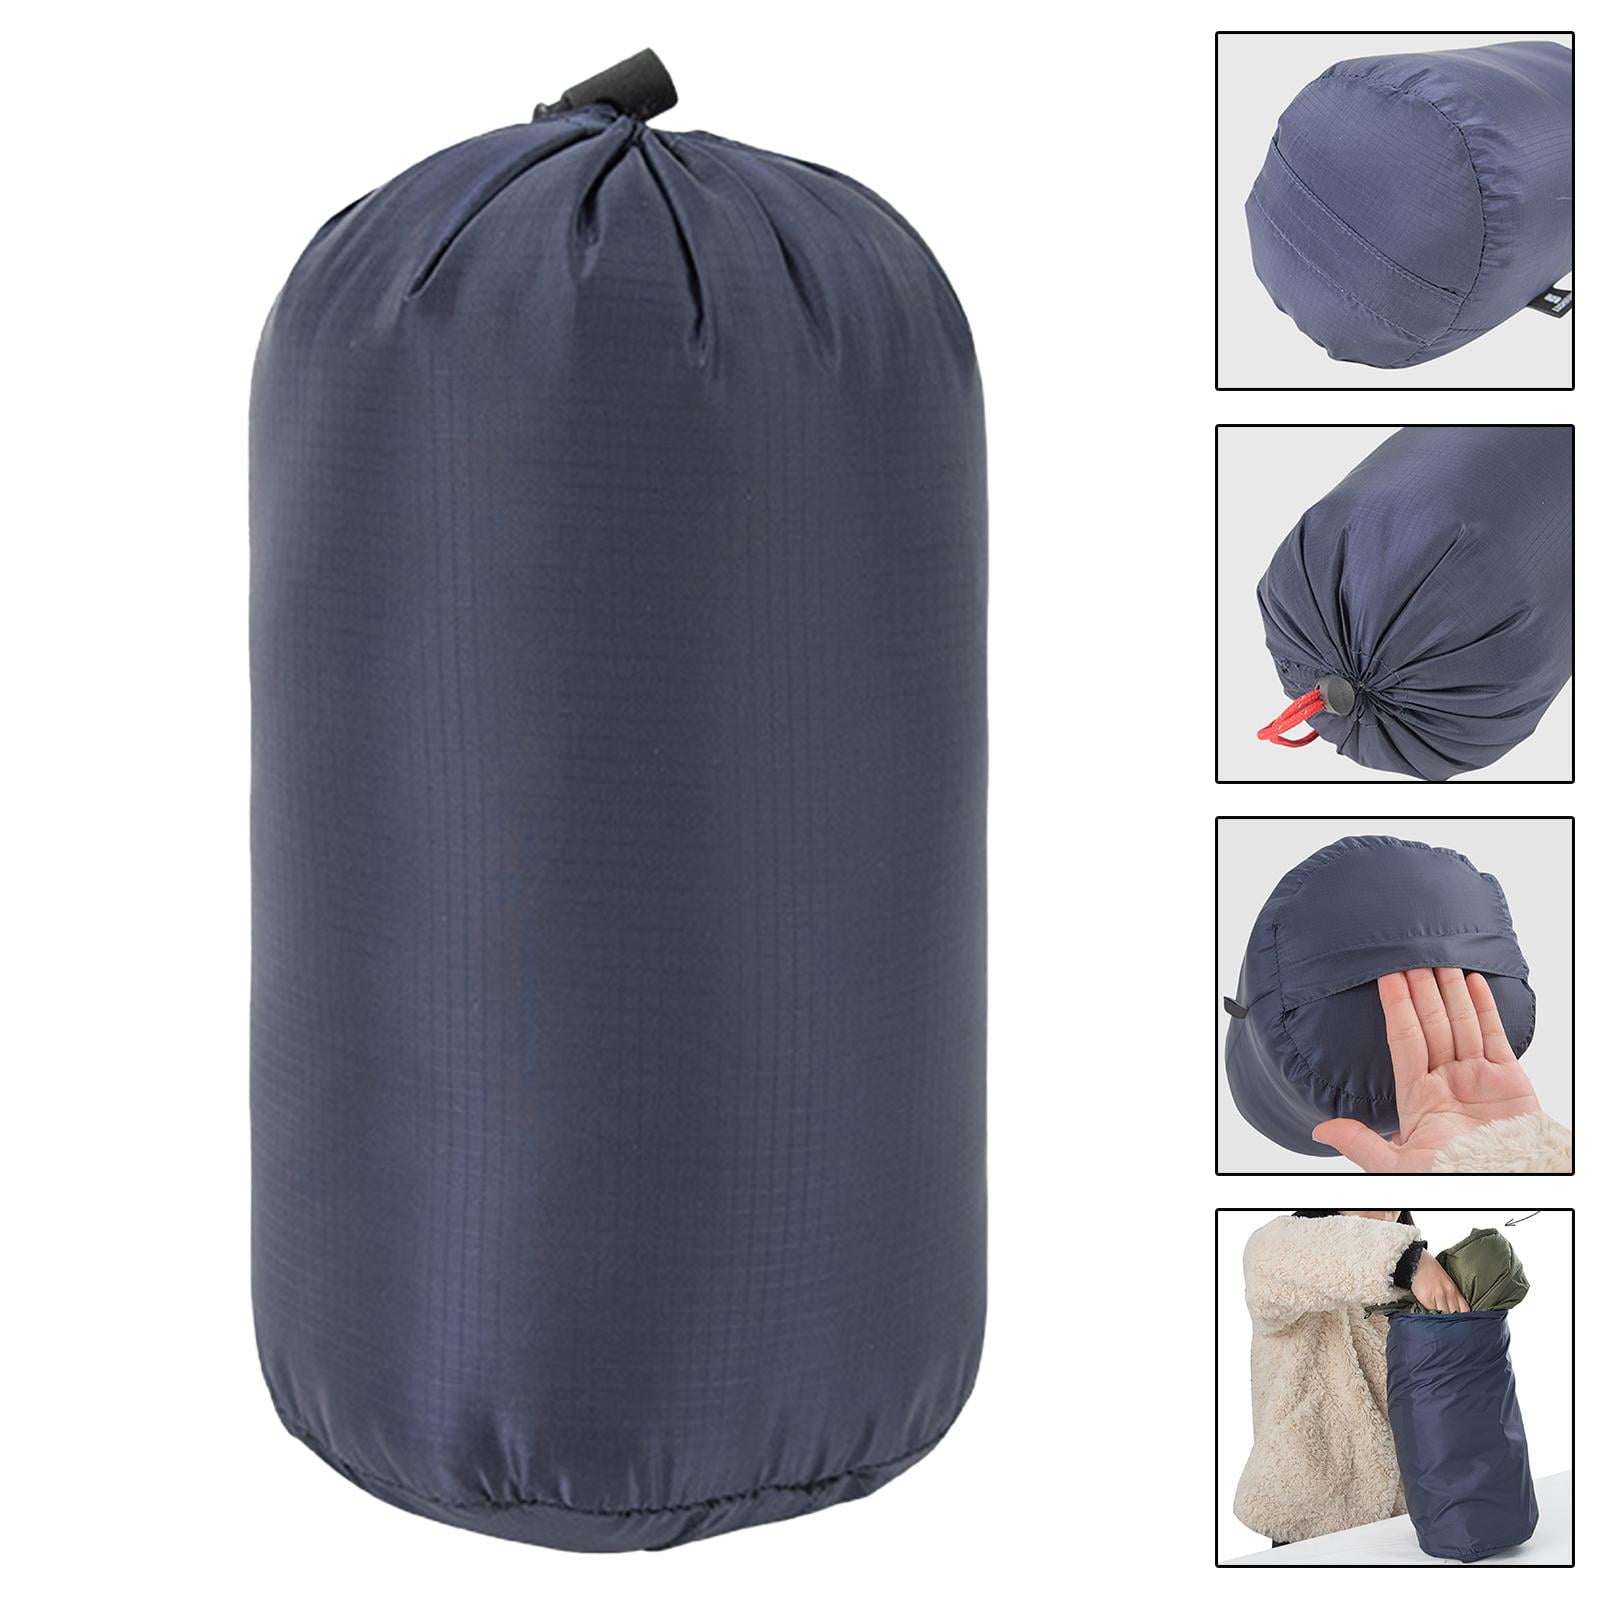  CLISPEED 2pcs Travel Compression Bags Dry Sack